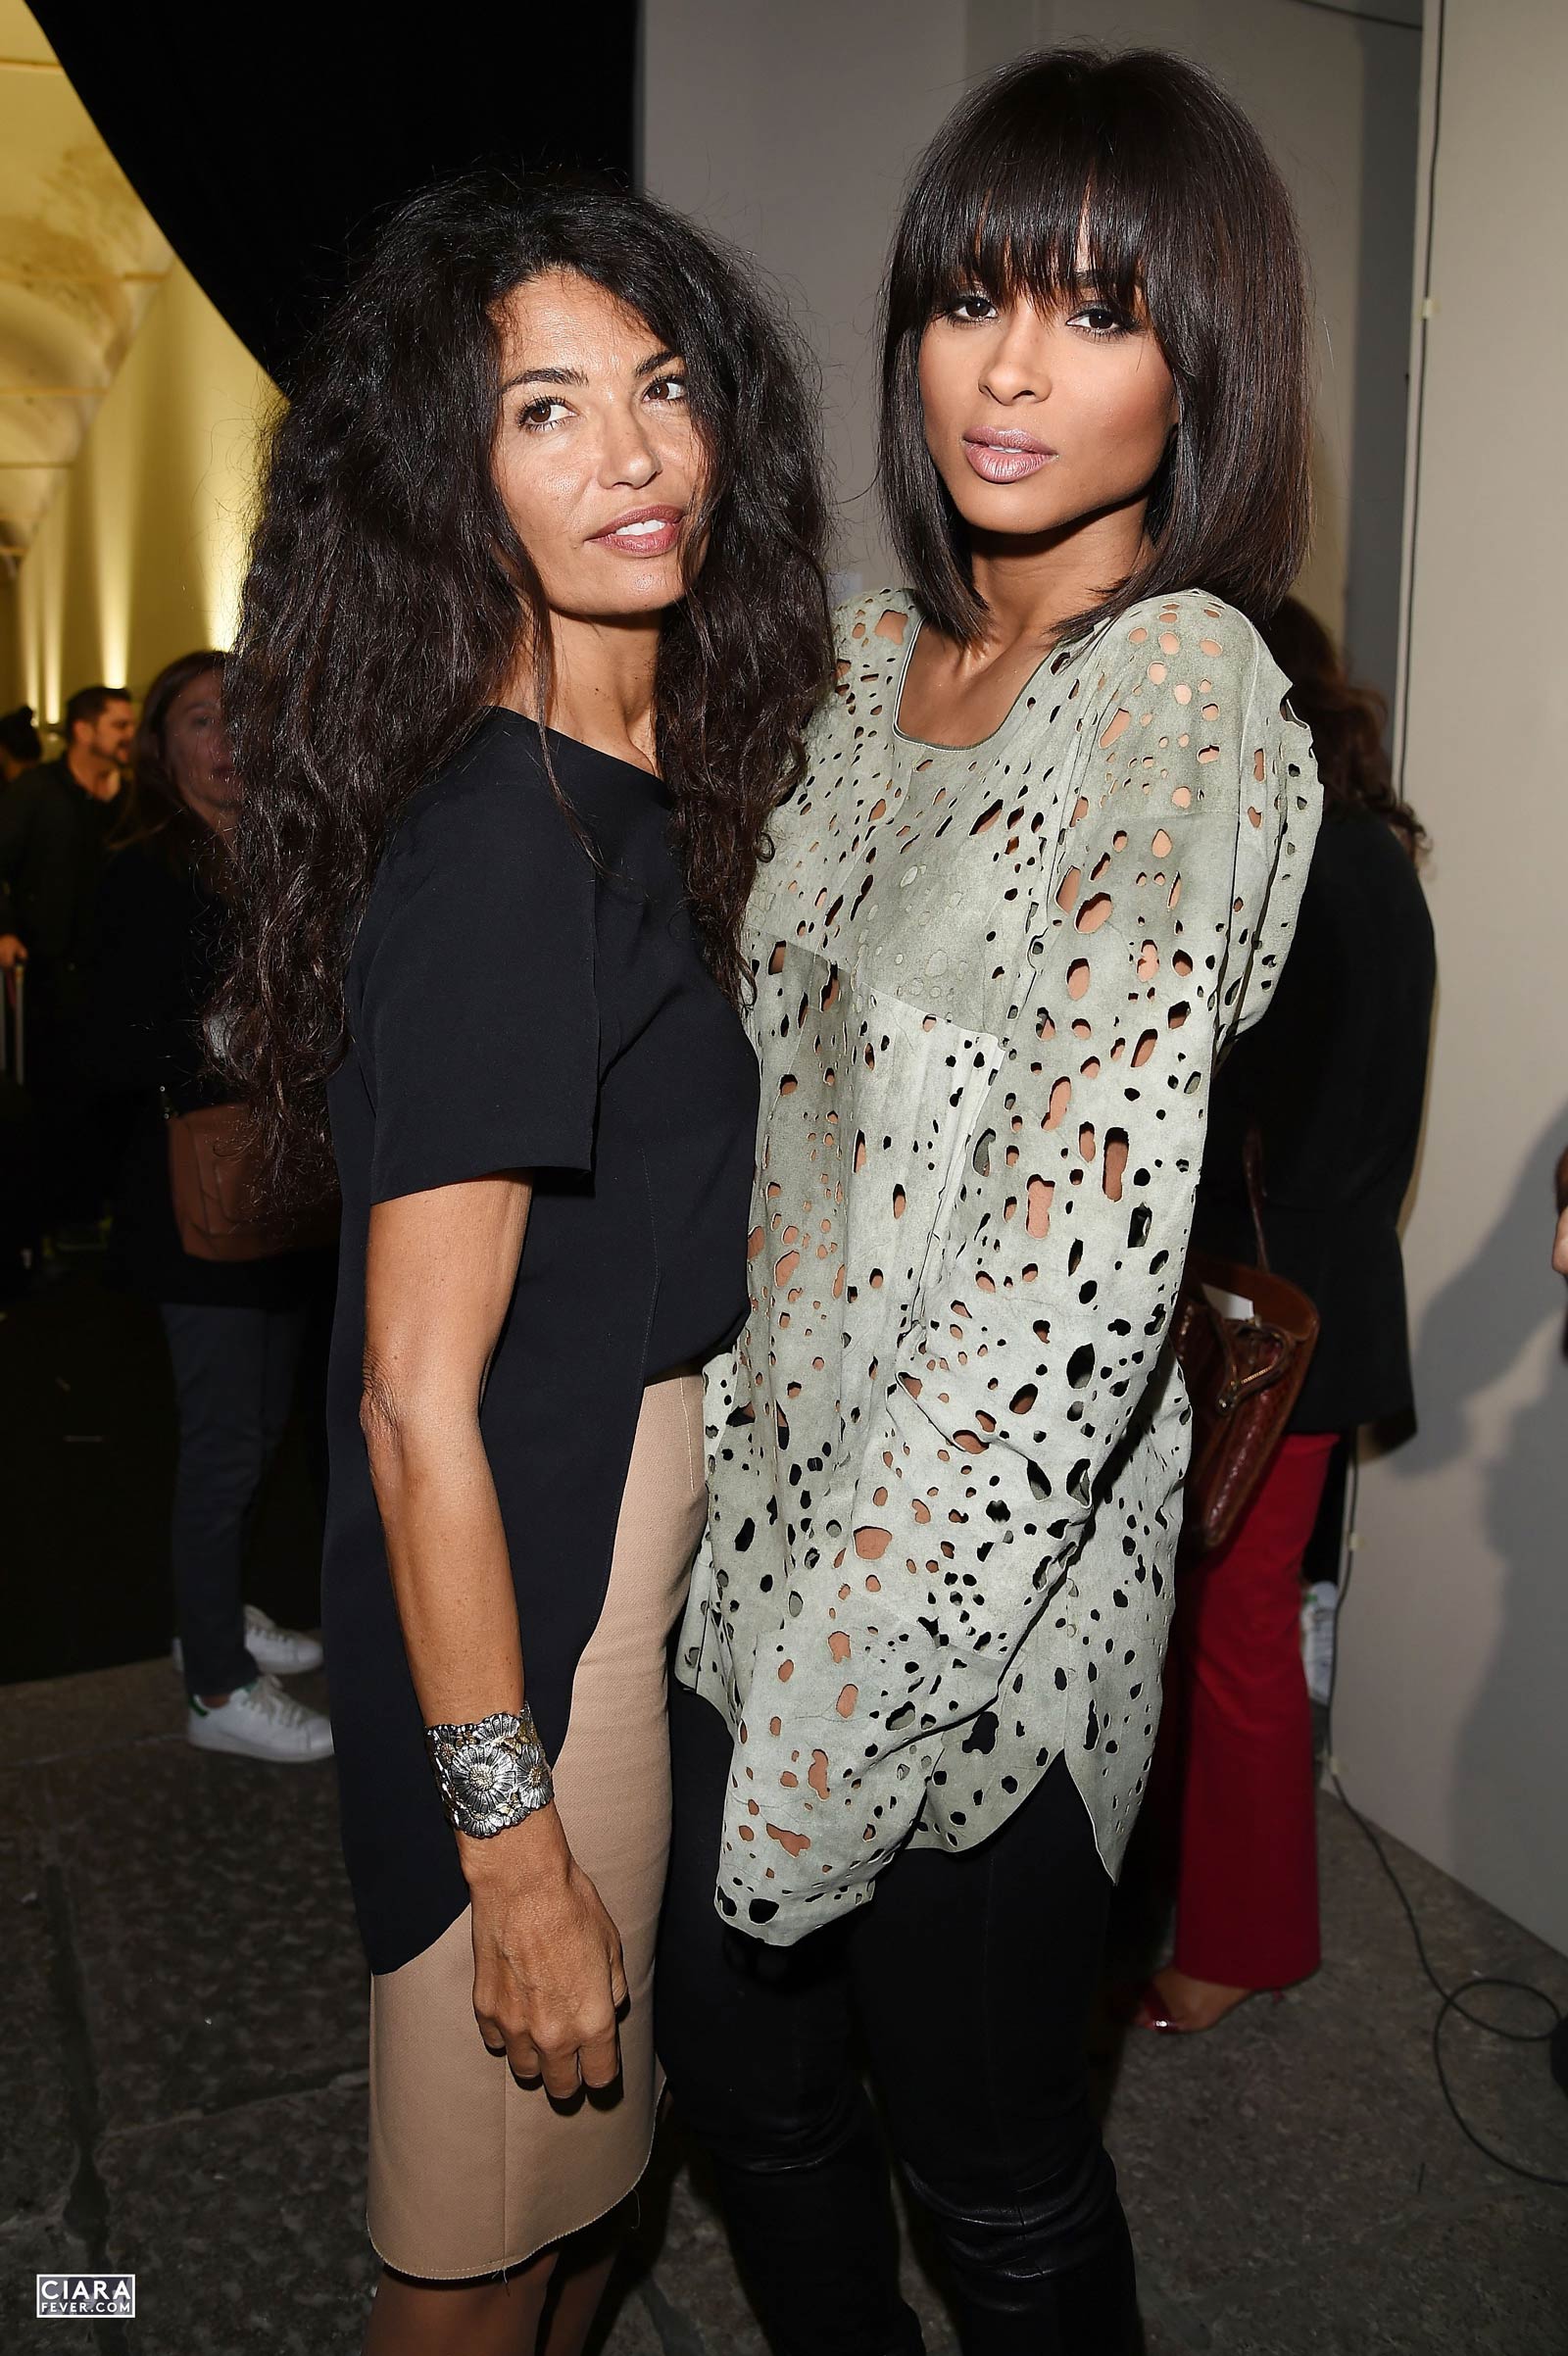 Ciara attends the Roberto Cavalli show during the Milan Fashion Week